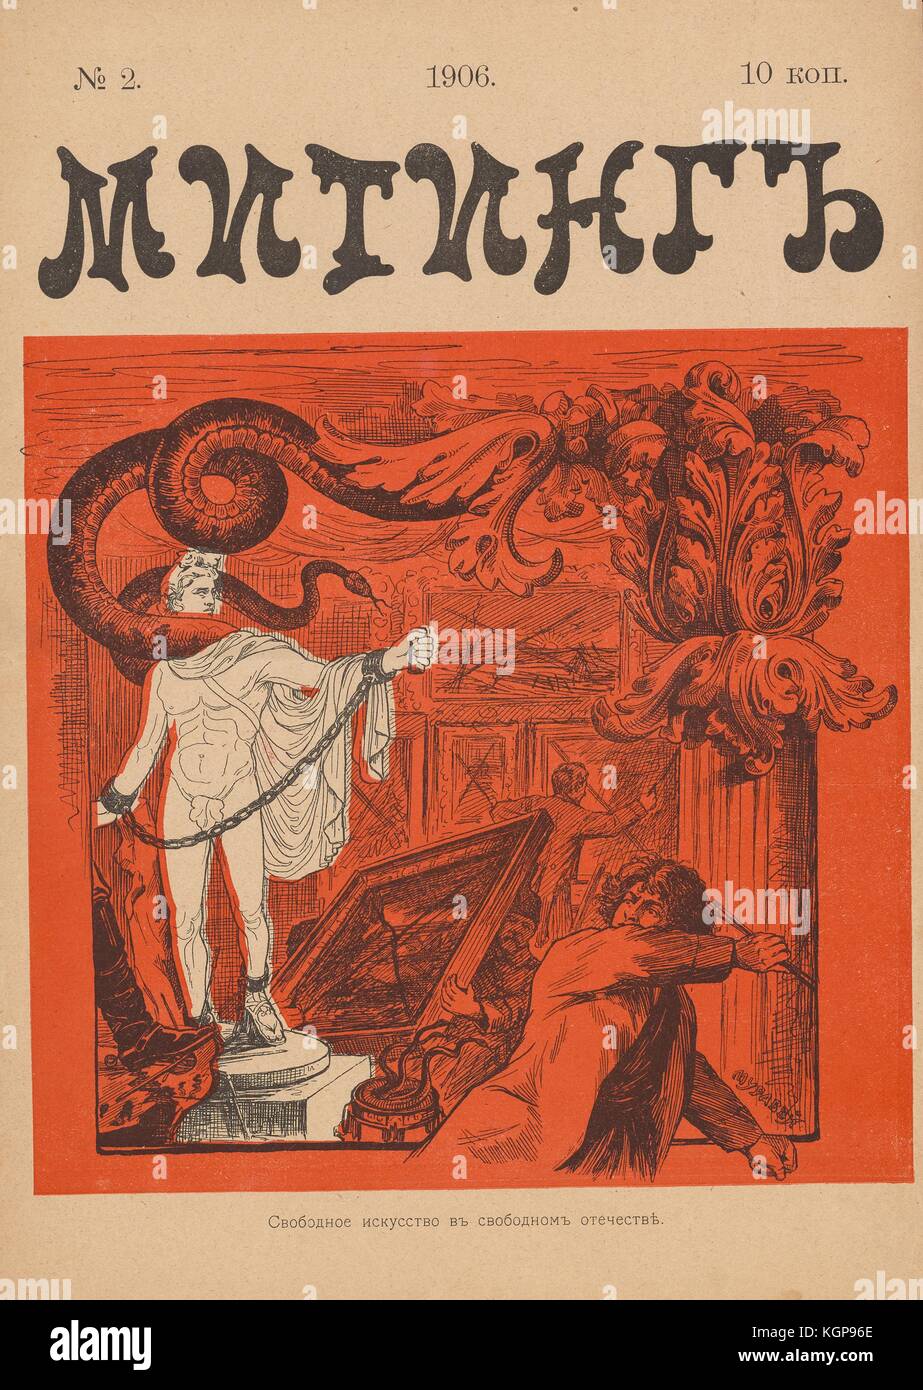 Cover of the Russian satirical journal Miting (Rally) showing a marble statue in shackles with a snake wrapped around its neck, a man holding a large painting, another man standing by the door as if knocking, and a third man, presumably an artist, holding paintbrushes and running away from someone whose boot is seen in the lower left corner, with text reading 'Free art in a free homeland', 1906. Stock Photo